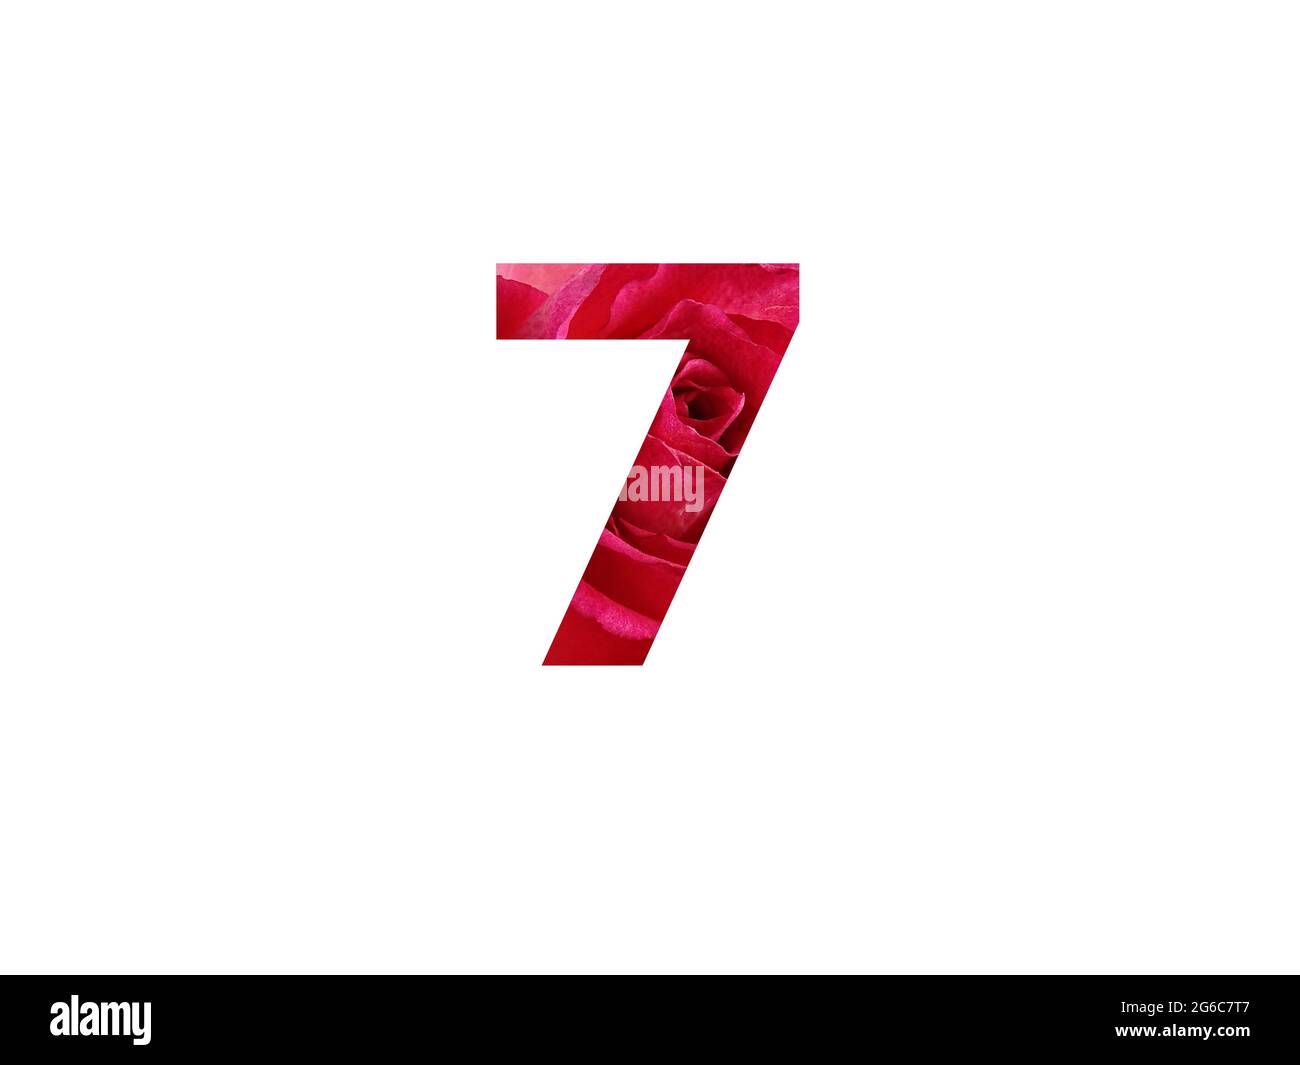 Number 7 of the alphabet made with a photo of a red rose, isolated on a white background Stock Photo